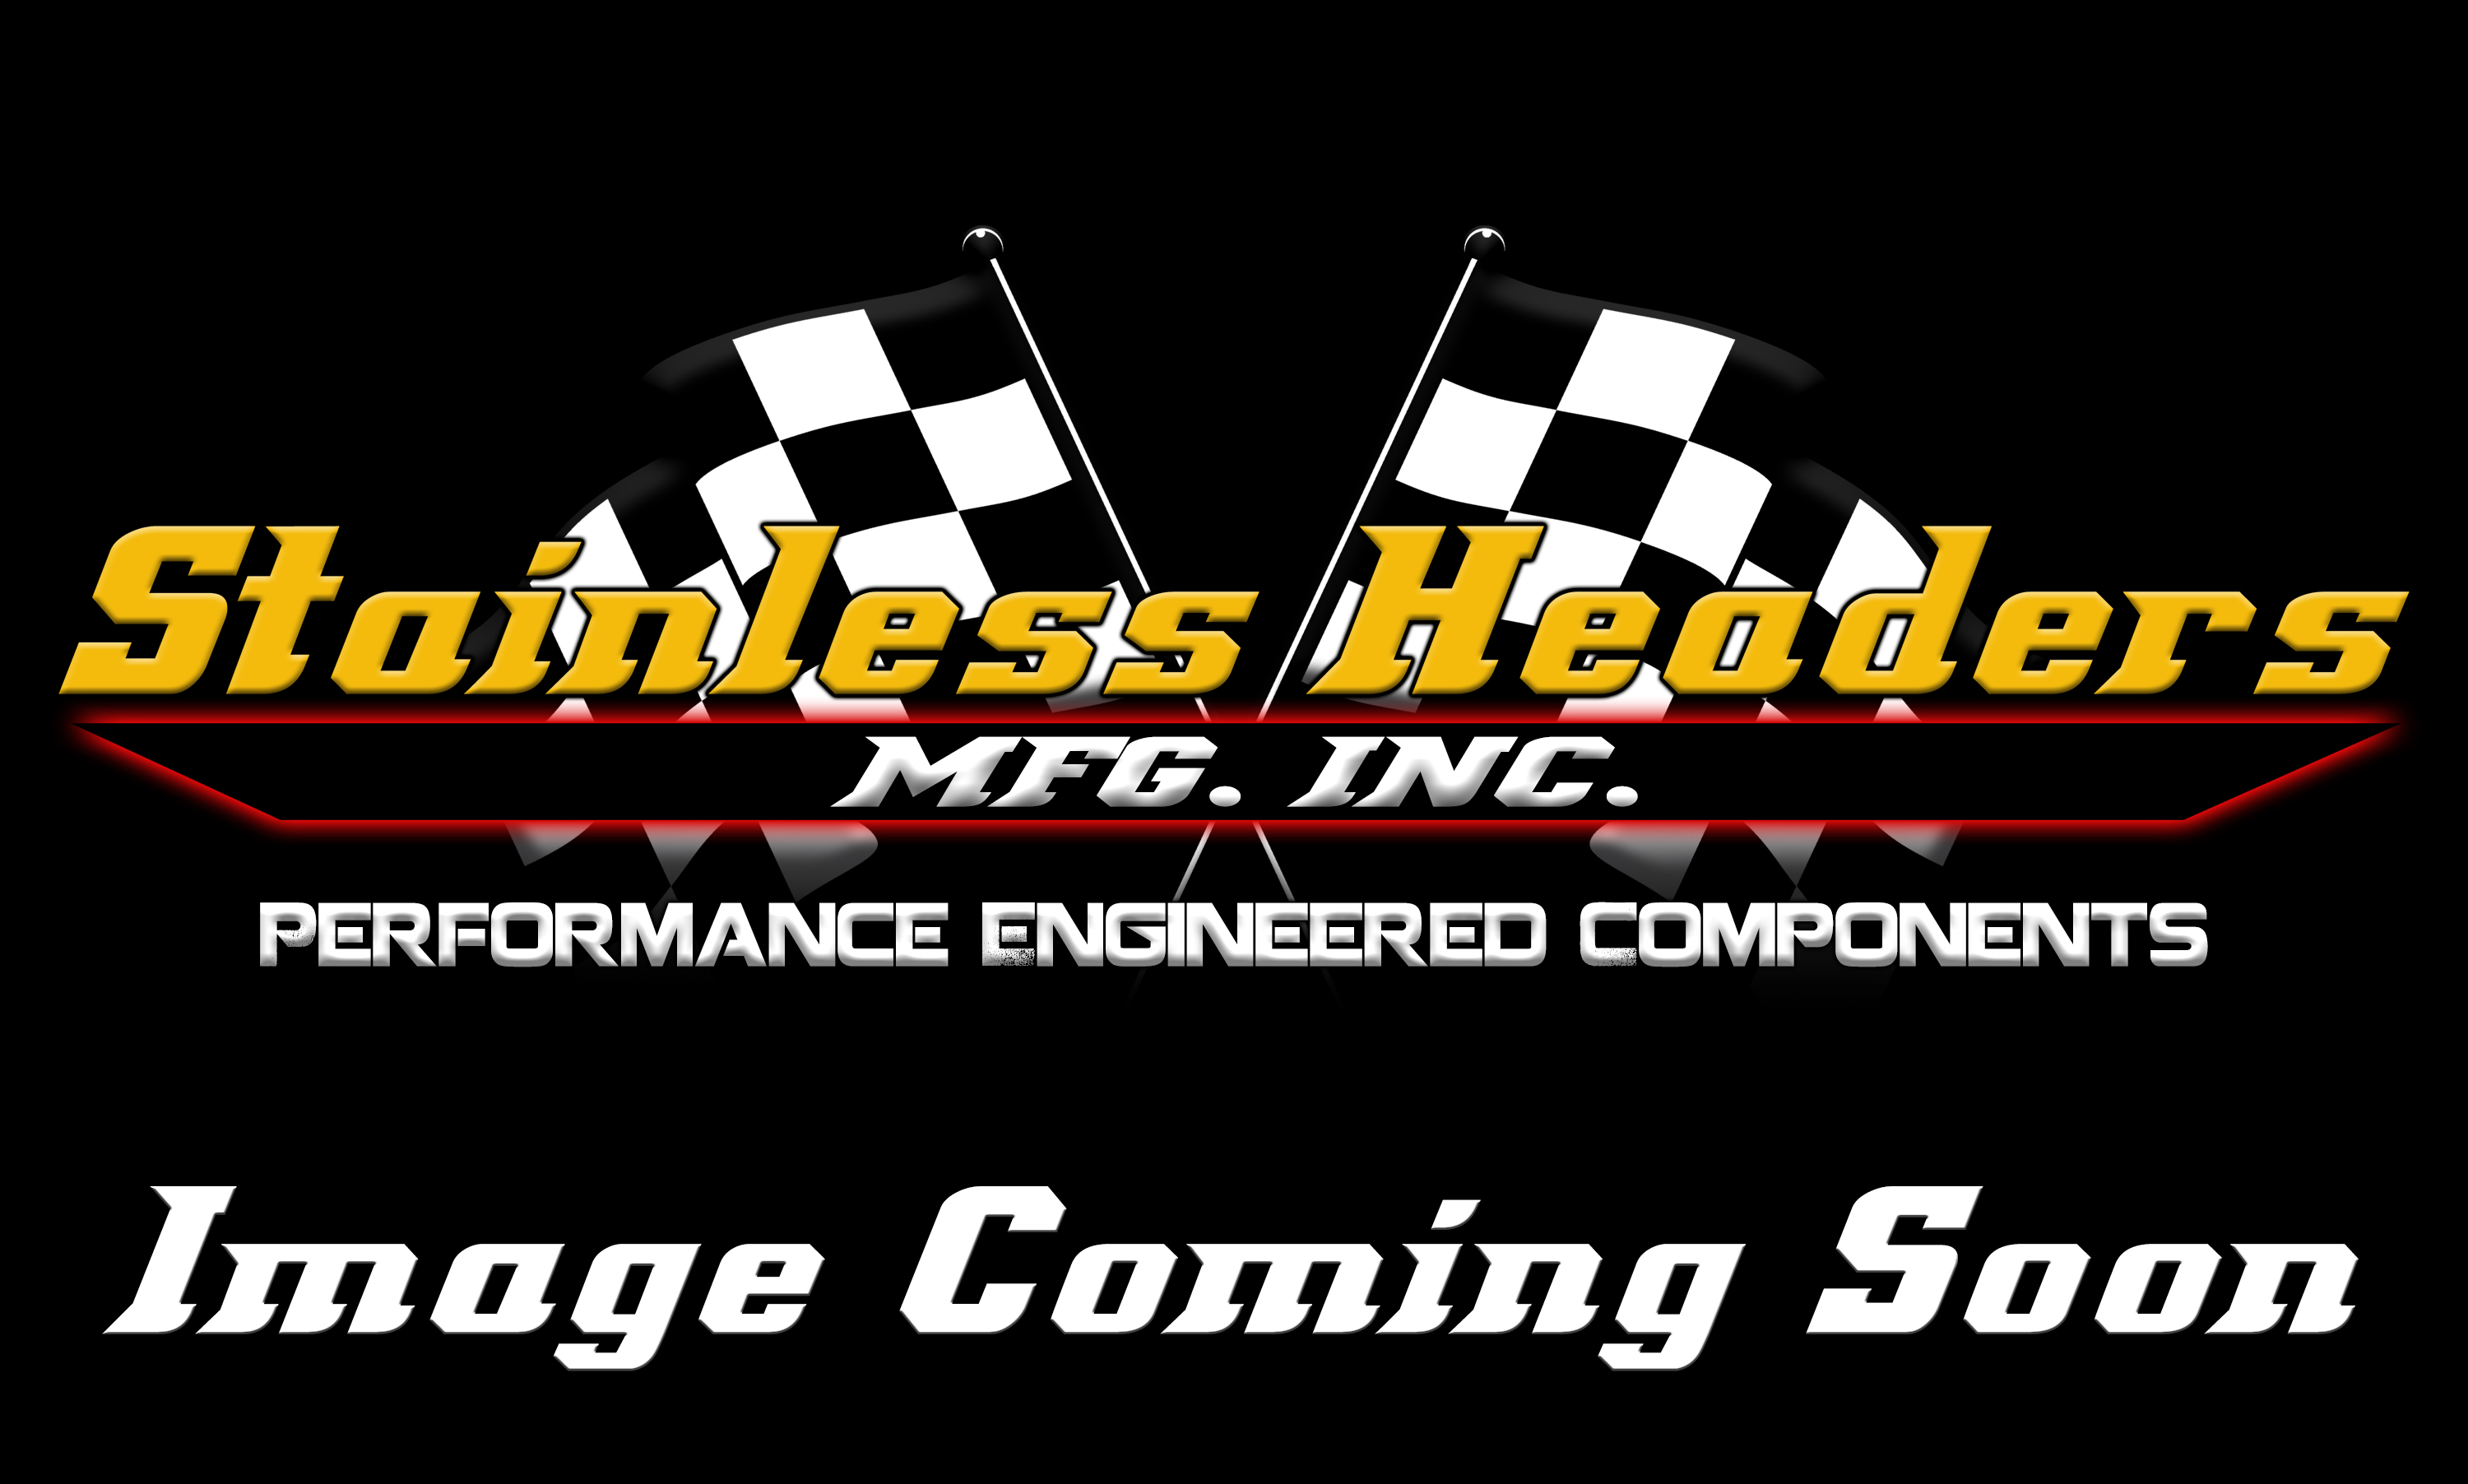 Custom Header Components - Merge Collectors - Stainless Headers - 1 1/2" Primary 4 into 1 Performance Merge Collector-16ga 321ss